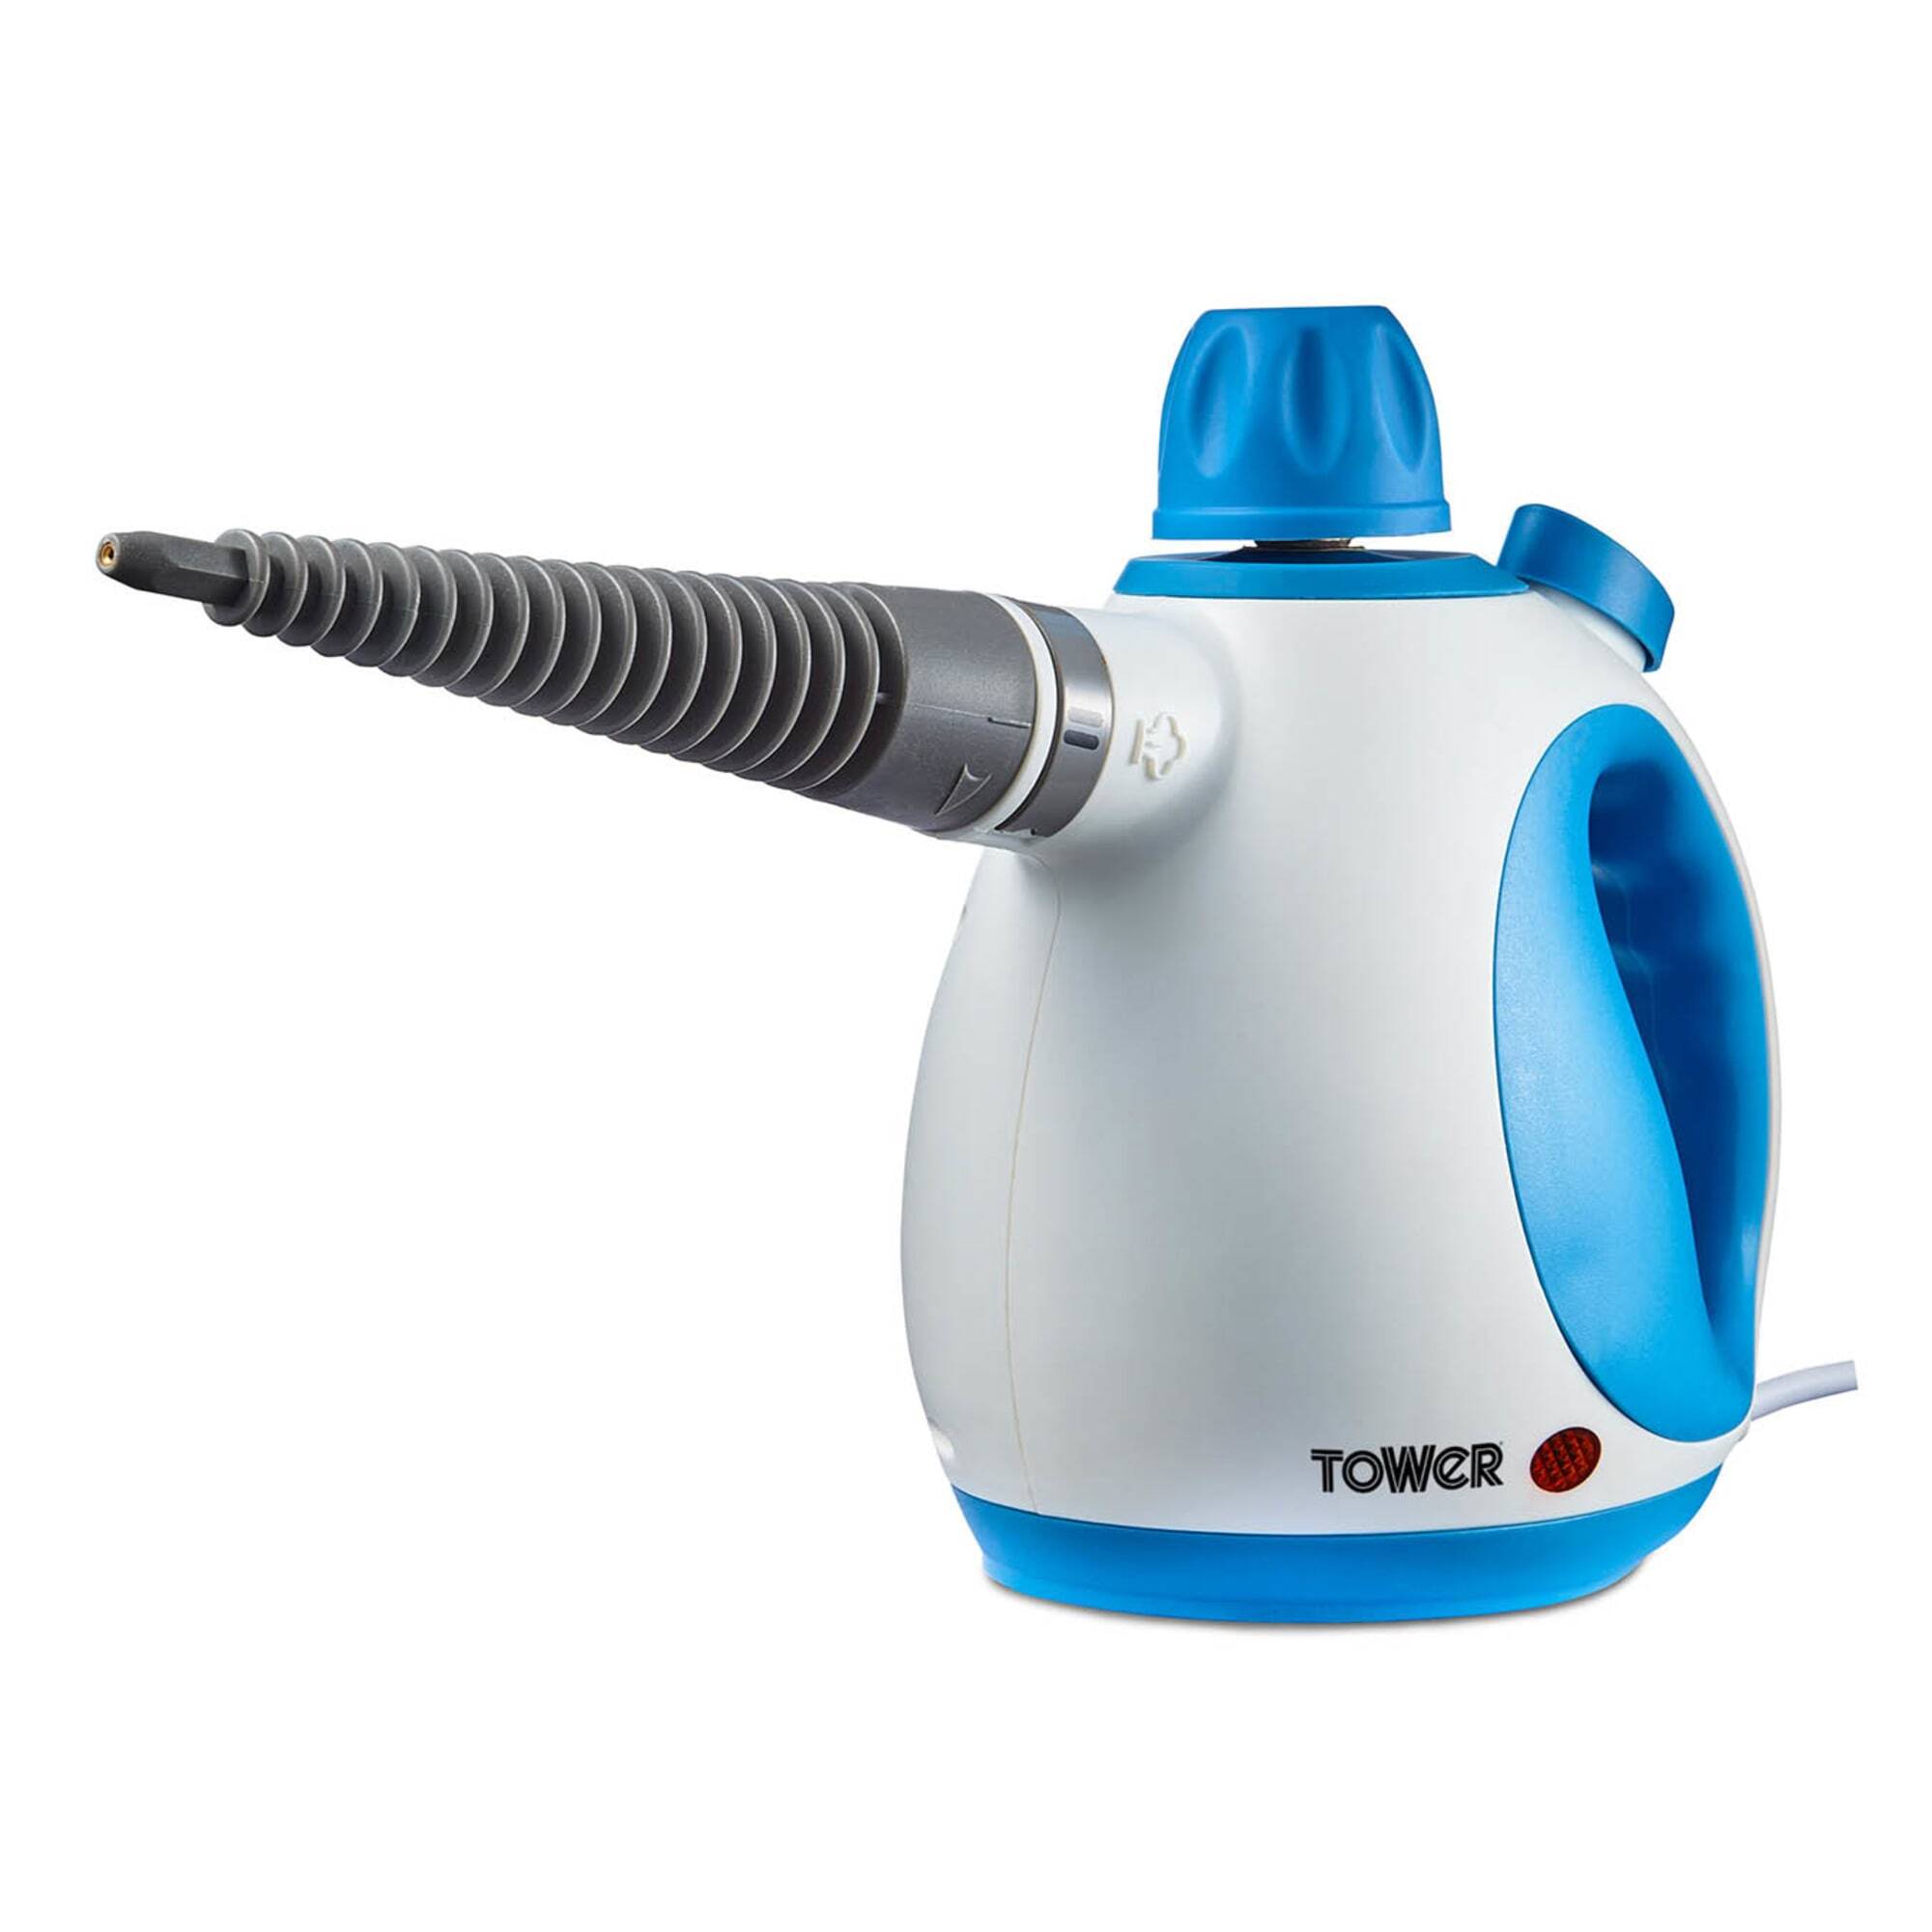 Tower 9in1 Steam Cleaner